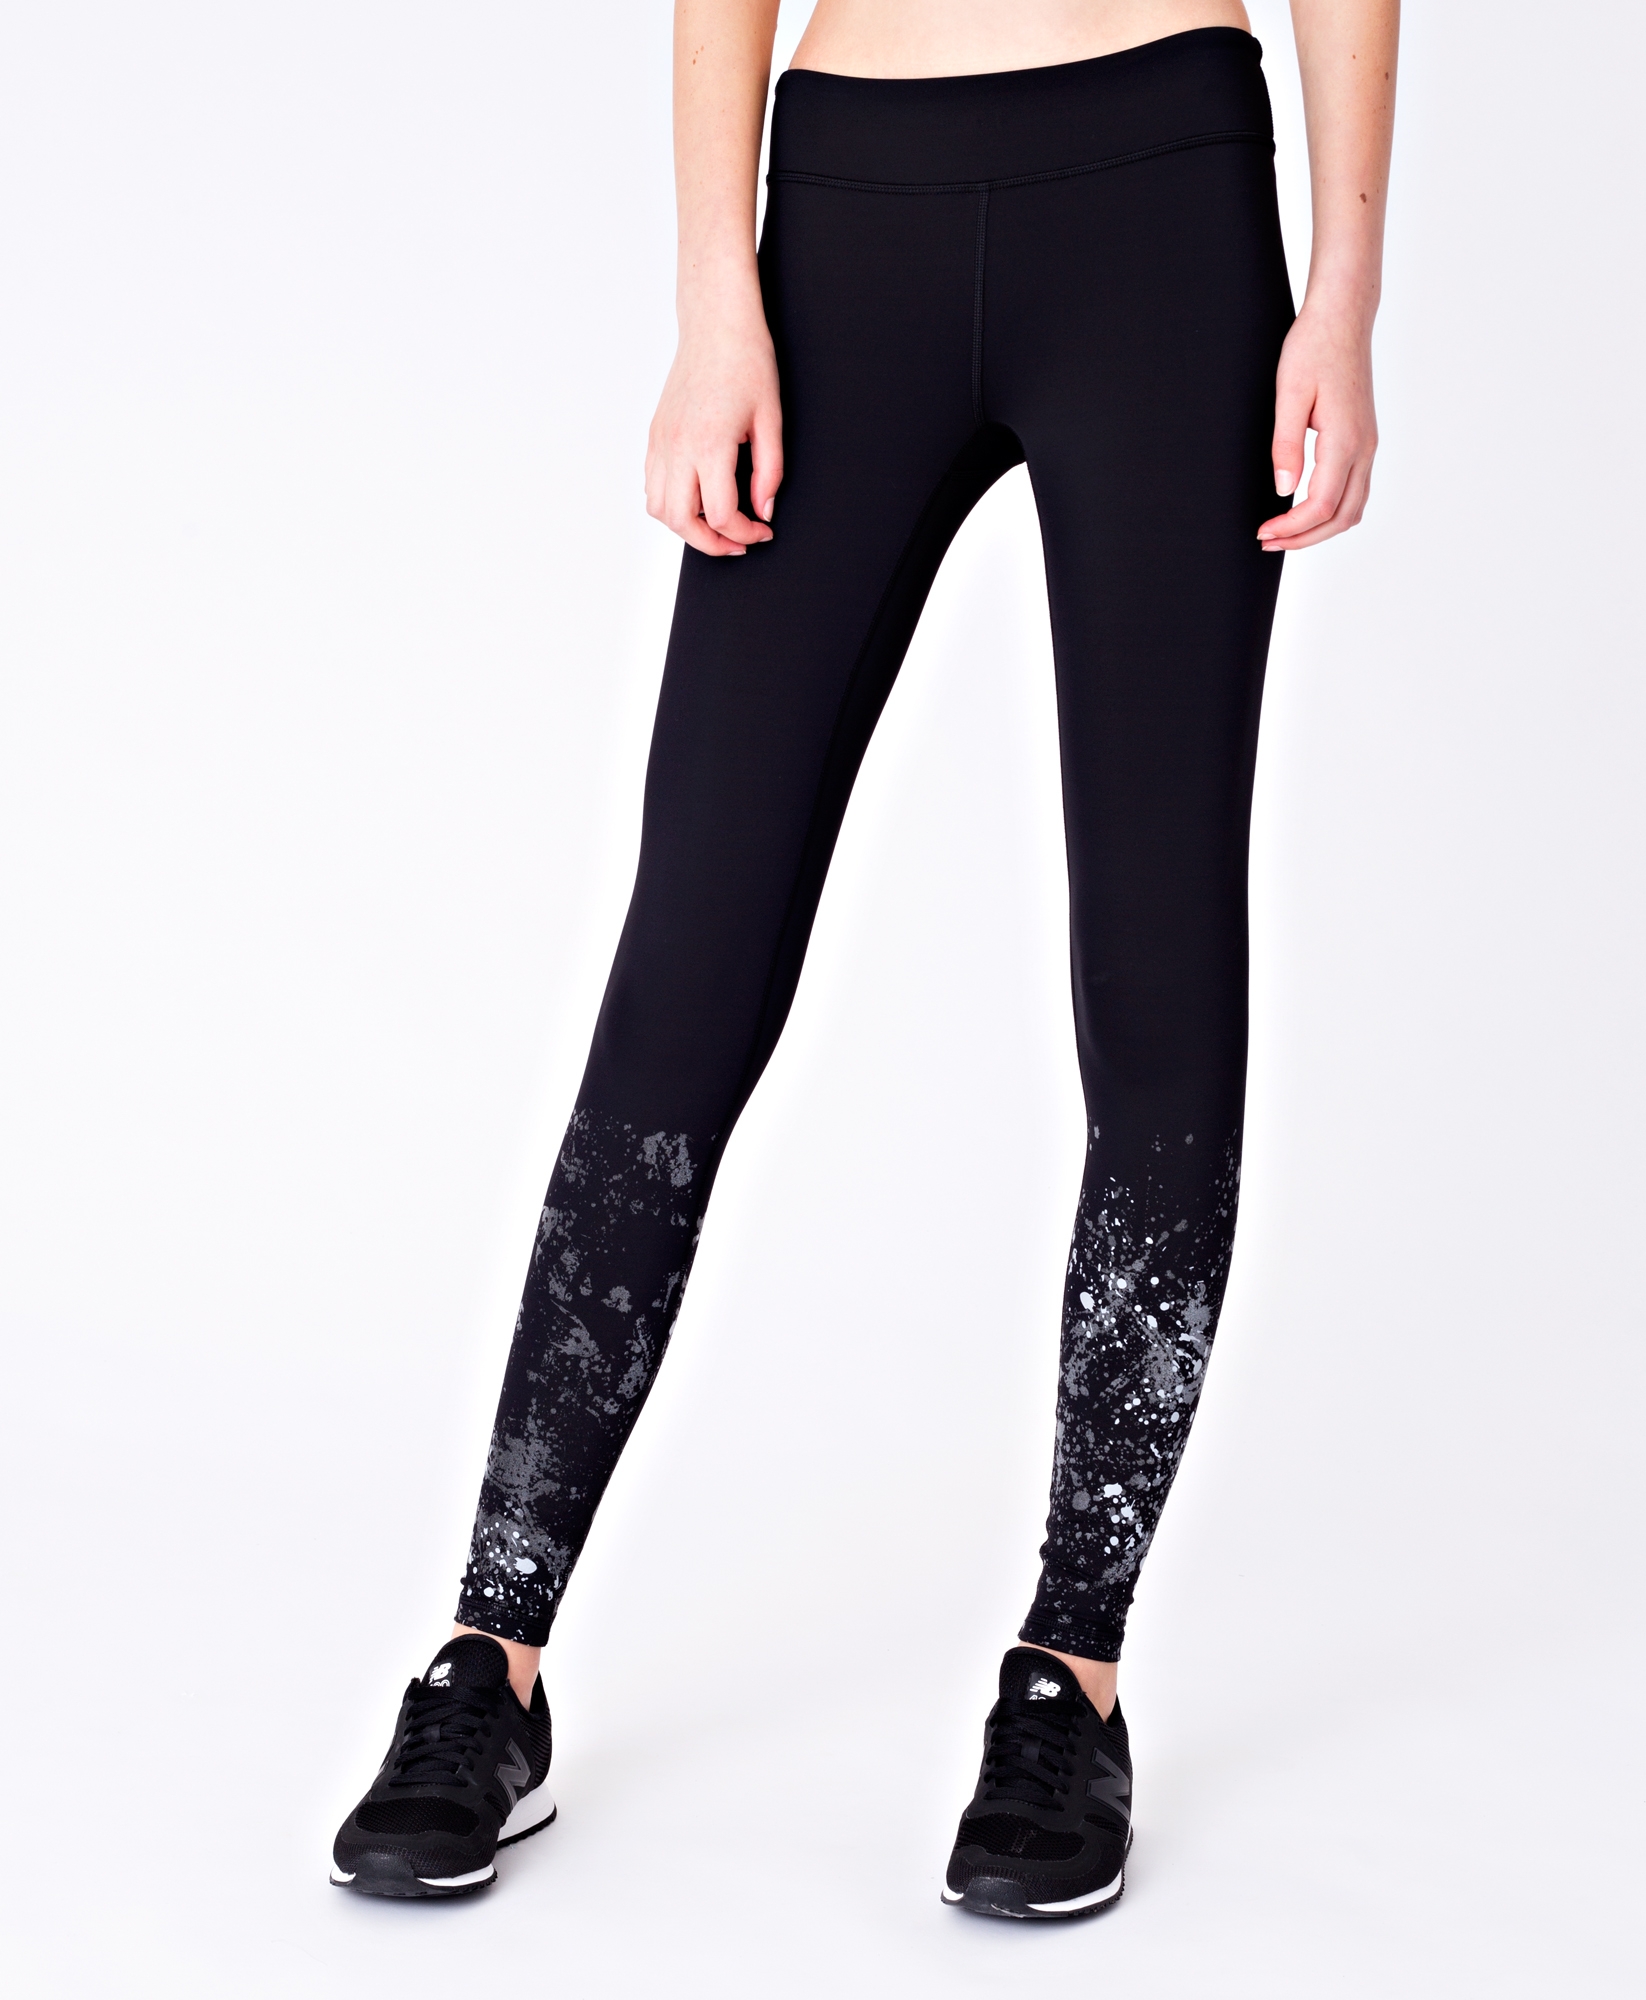 IVIVVA LEGGINGS 14 black Mesh with the Best girls youth active